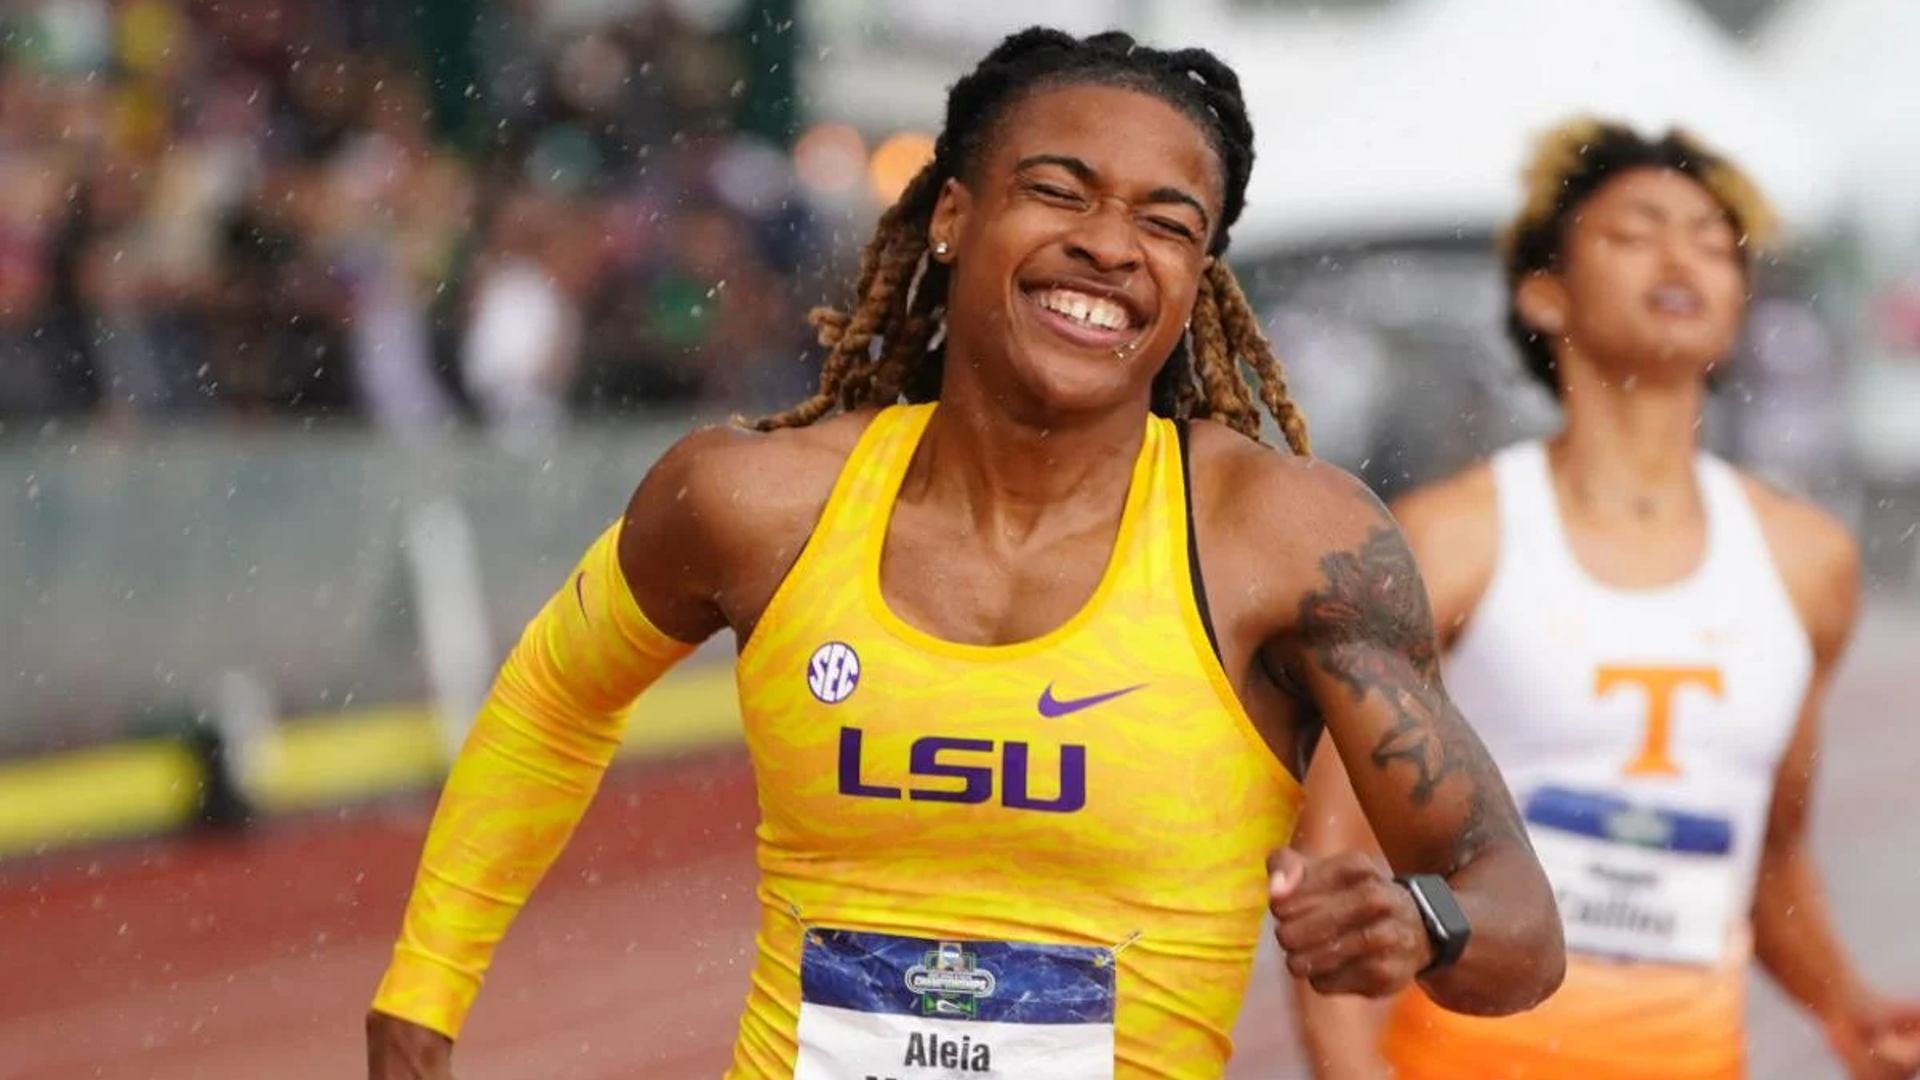 Aleia Hobbs in action in a collegiate meet while representing the LSU (Image Credits - USATF)